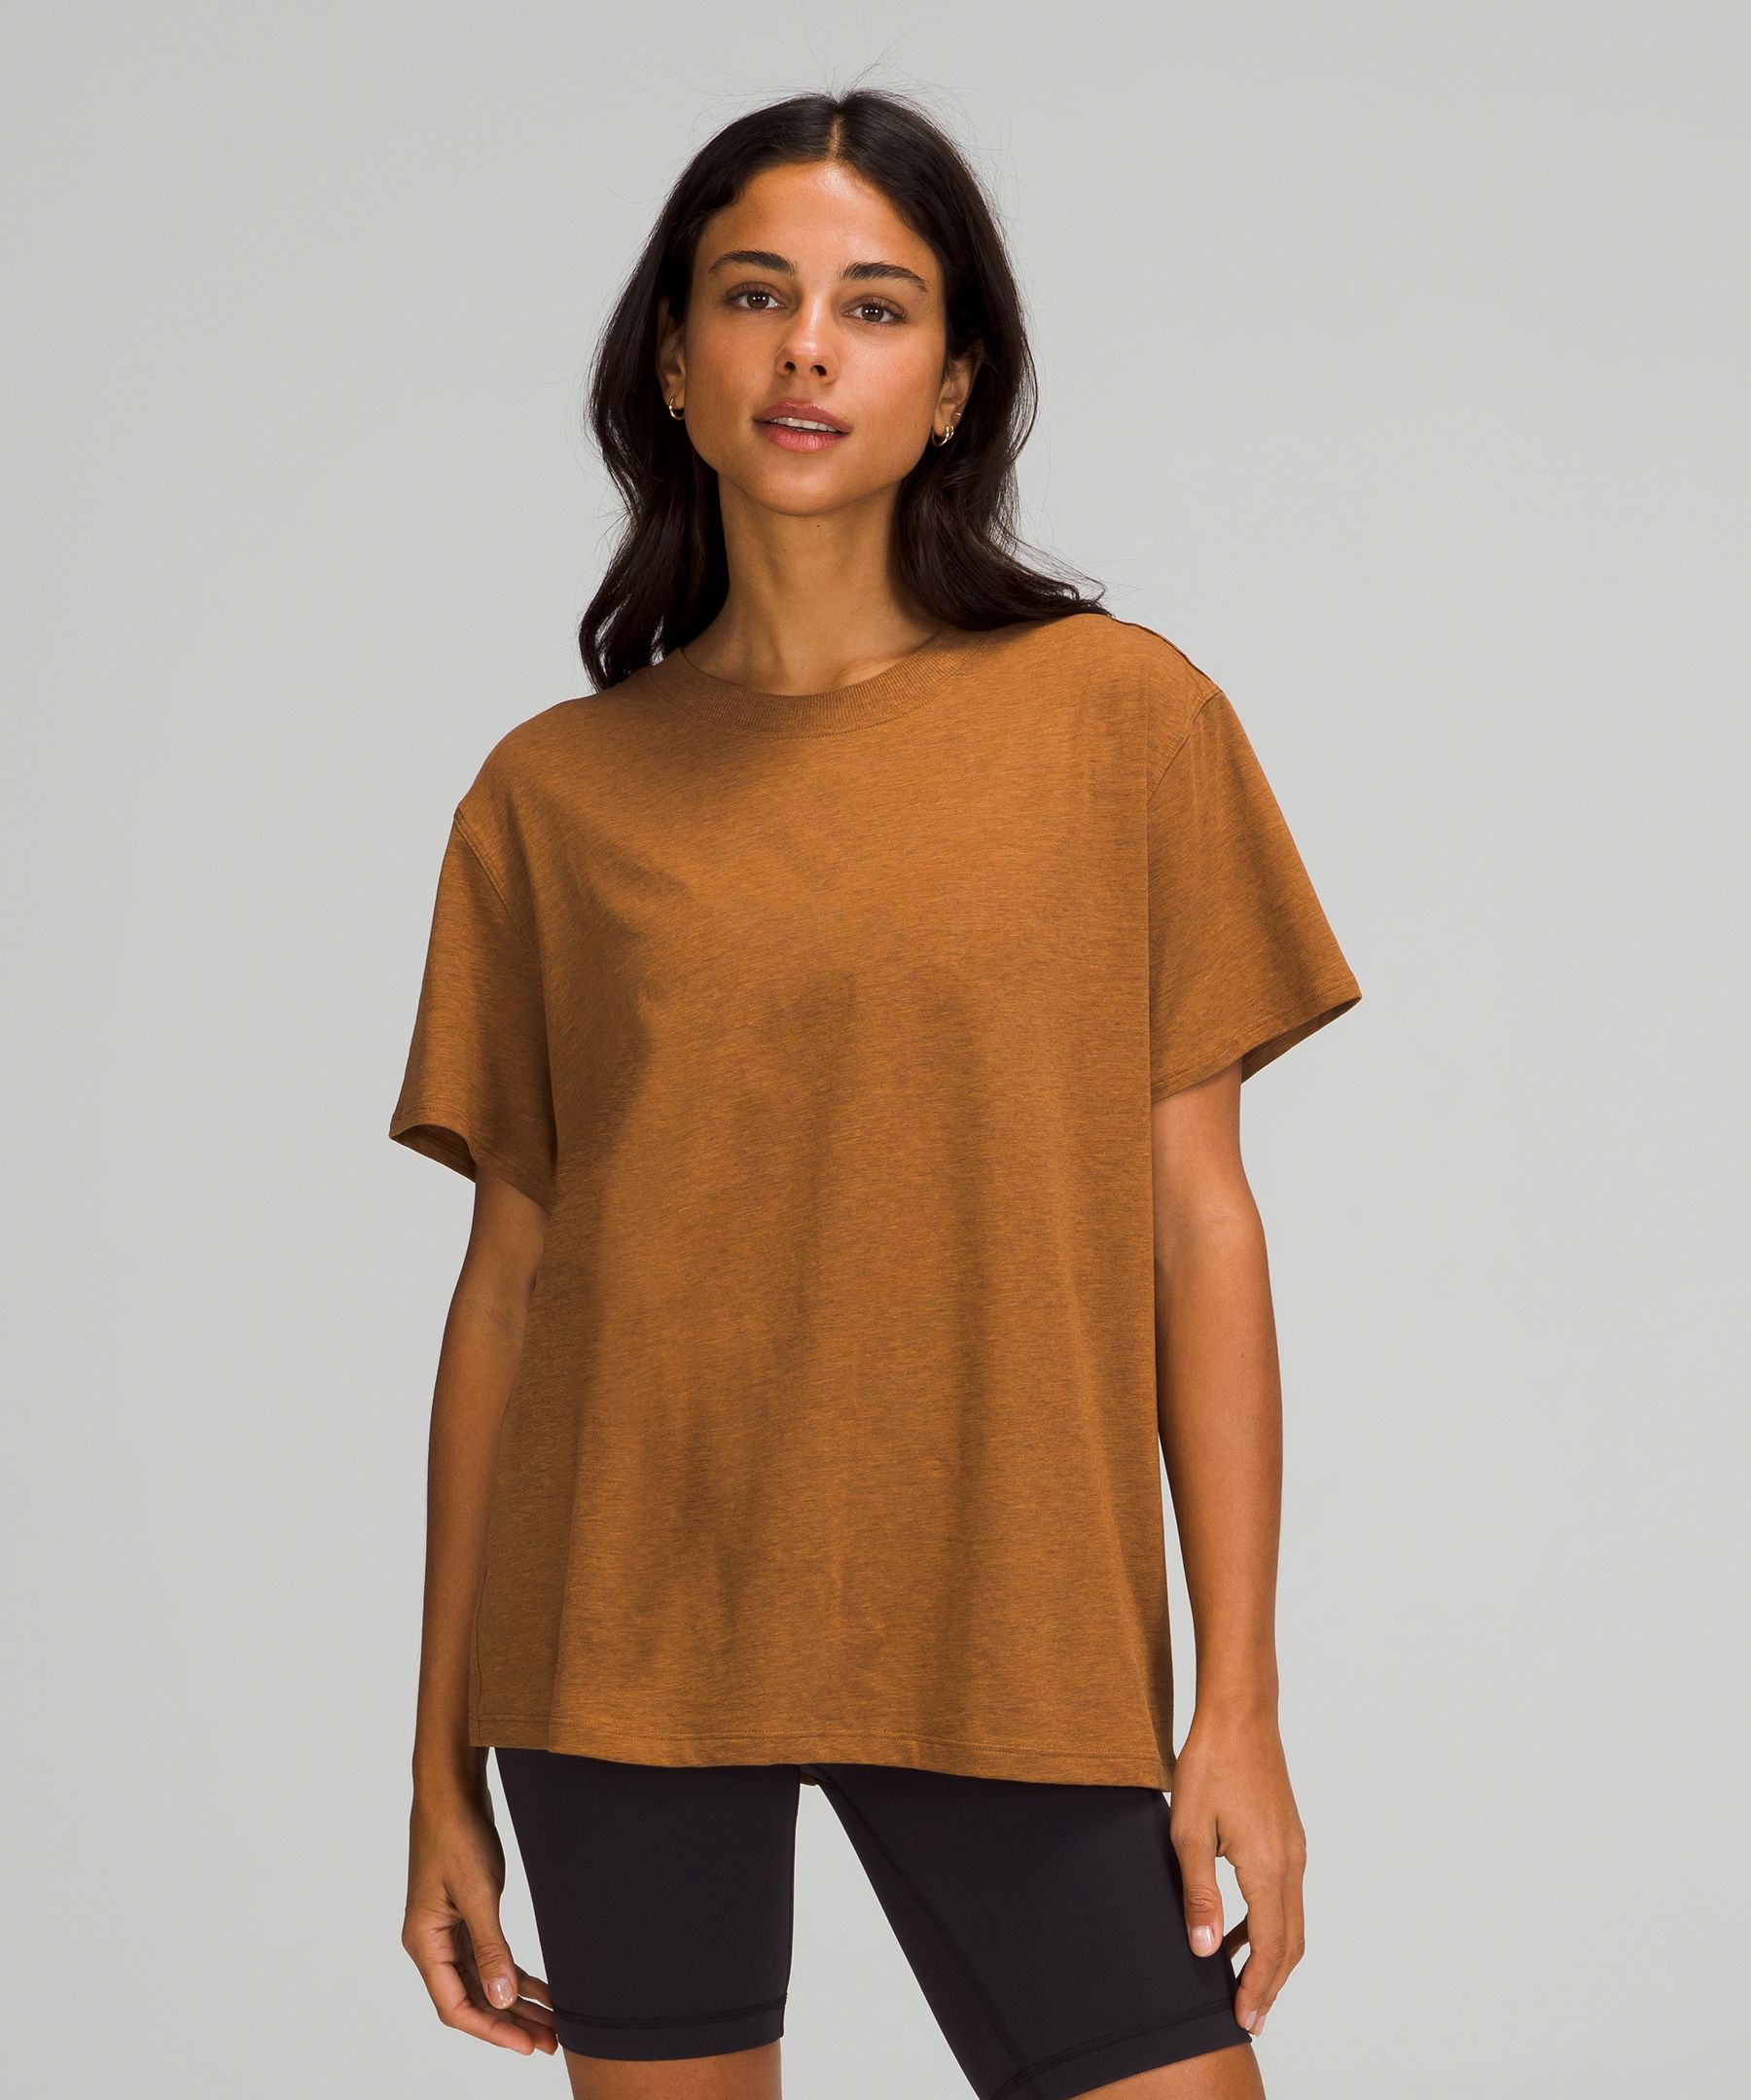 Lululemon All Yours Short Sleeve T-shirt In Heathered Copper Brown